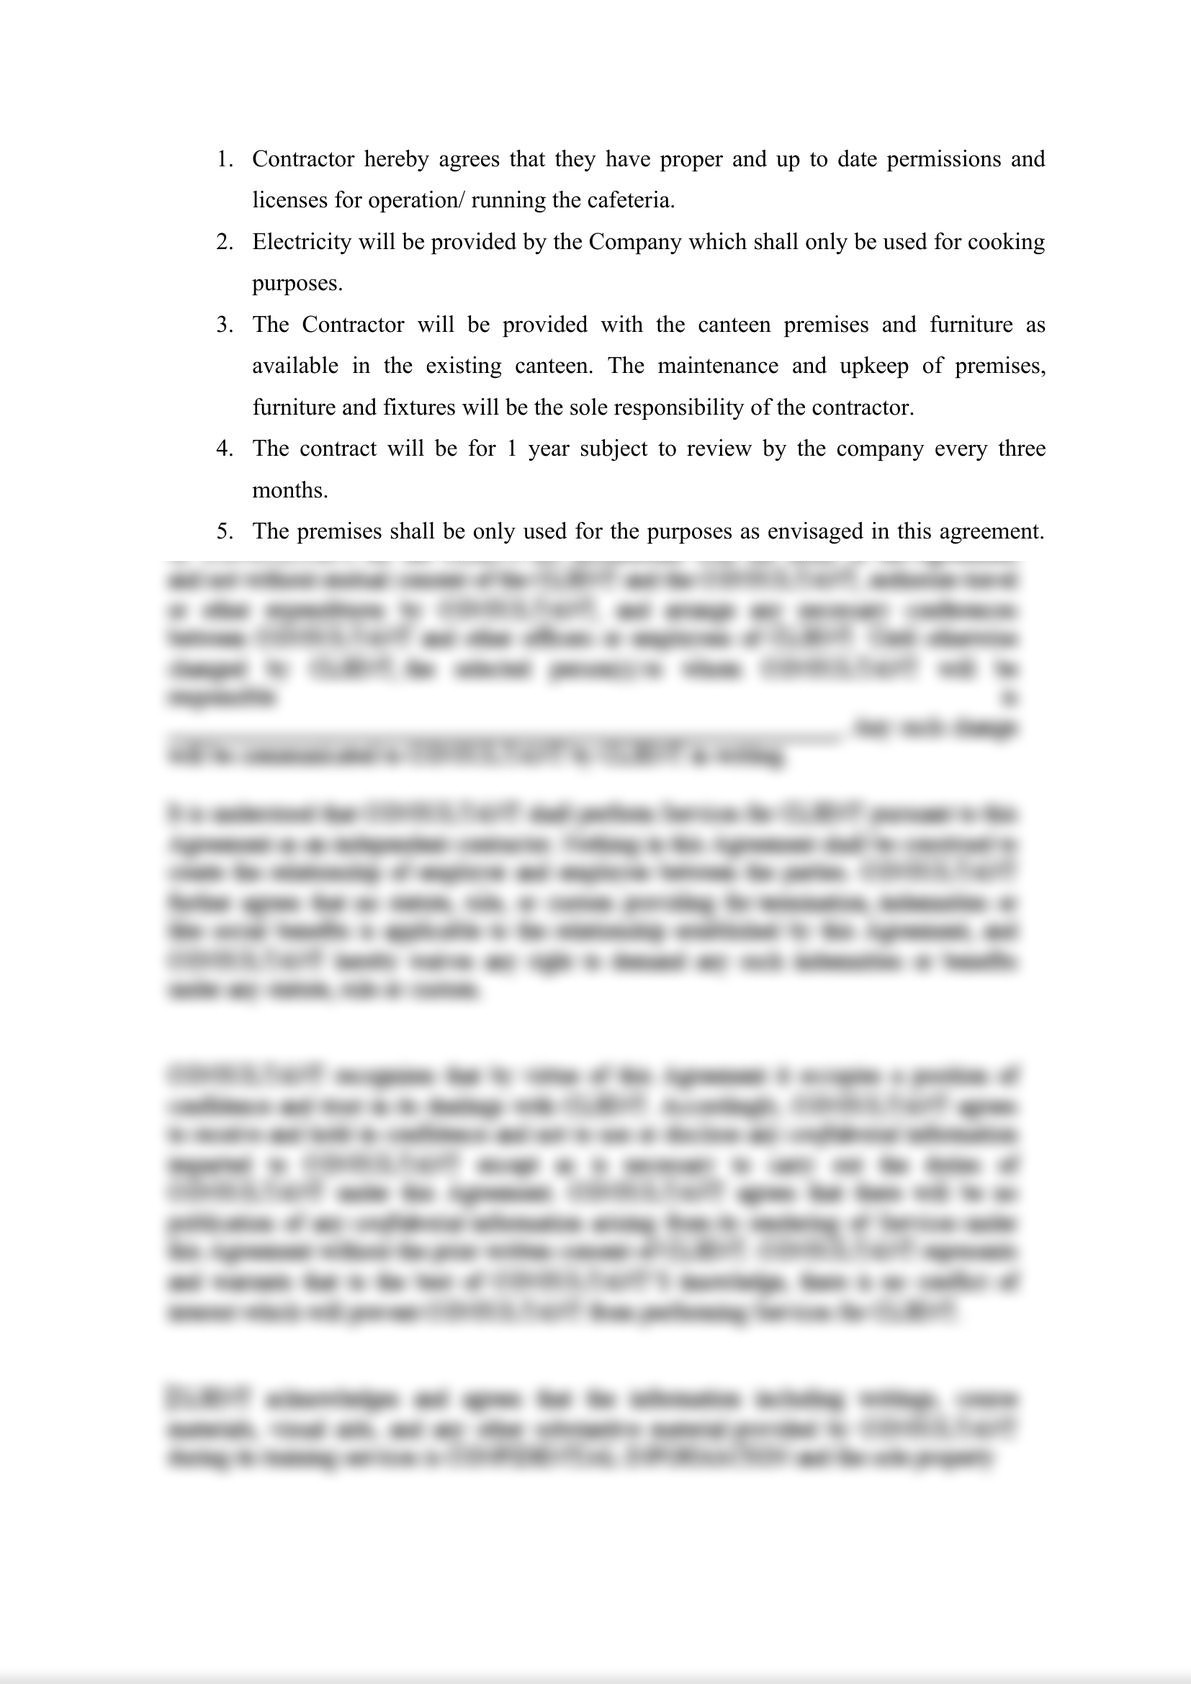 Cafeteria Contract Agreement-1